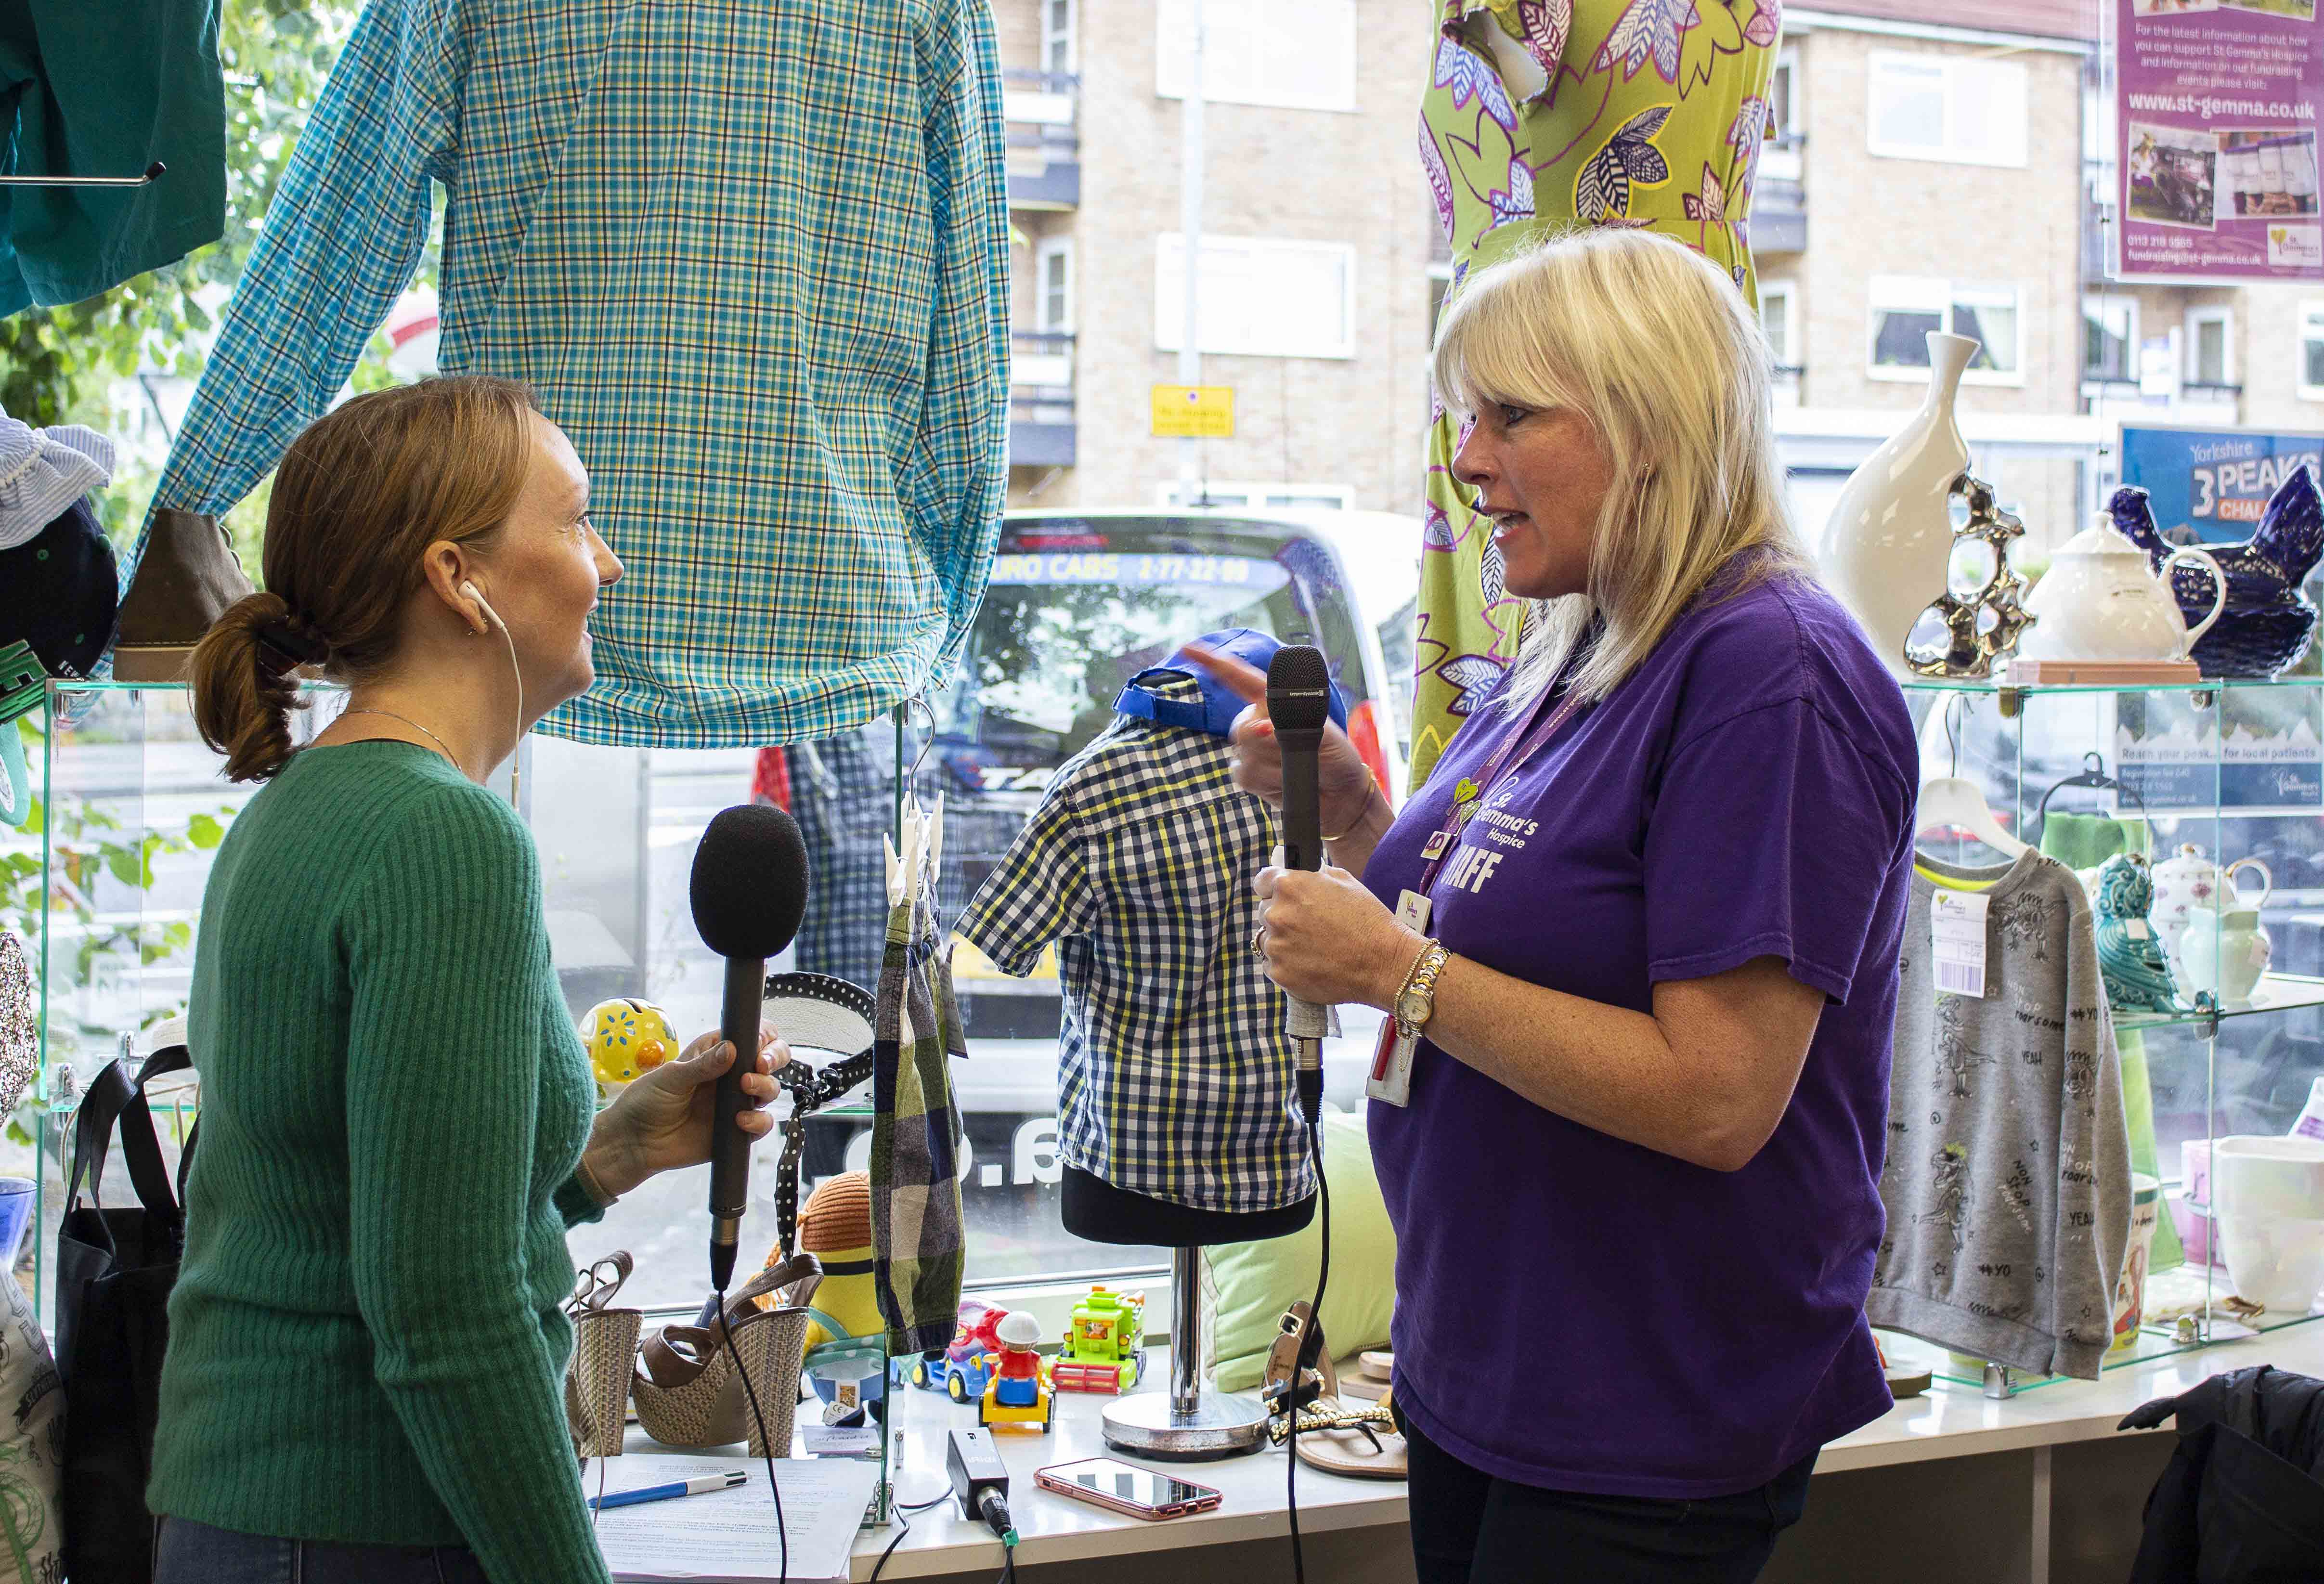 Interview for Radio 4 taking place in Moortown charity shop